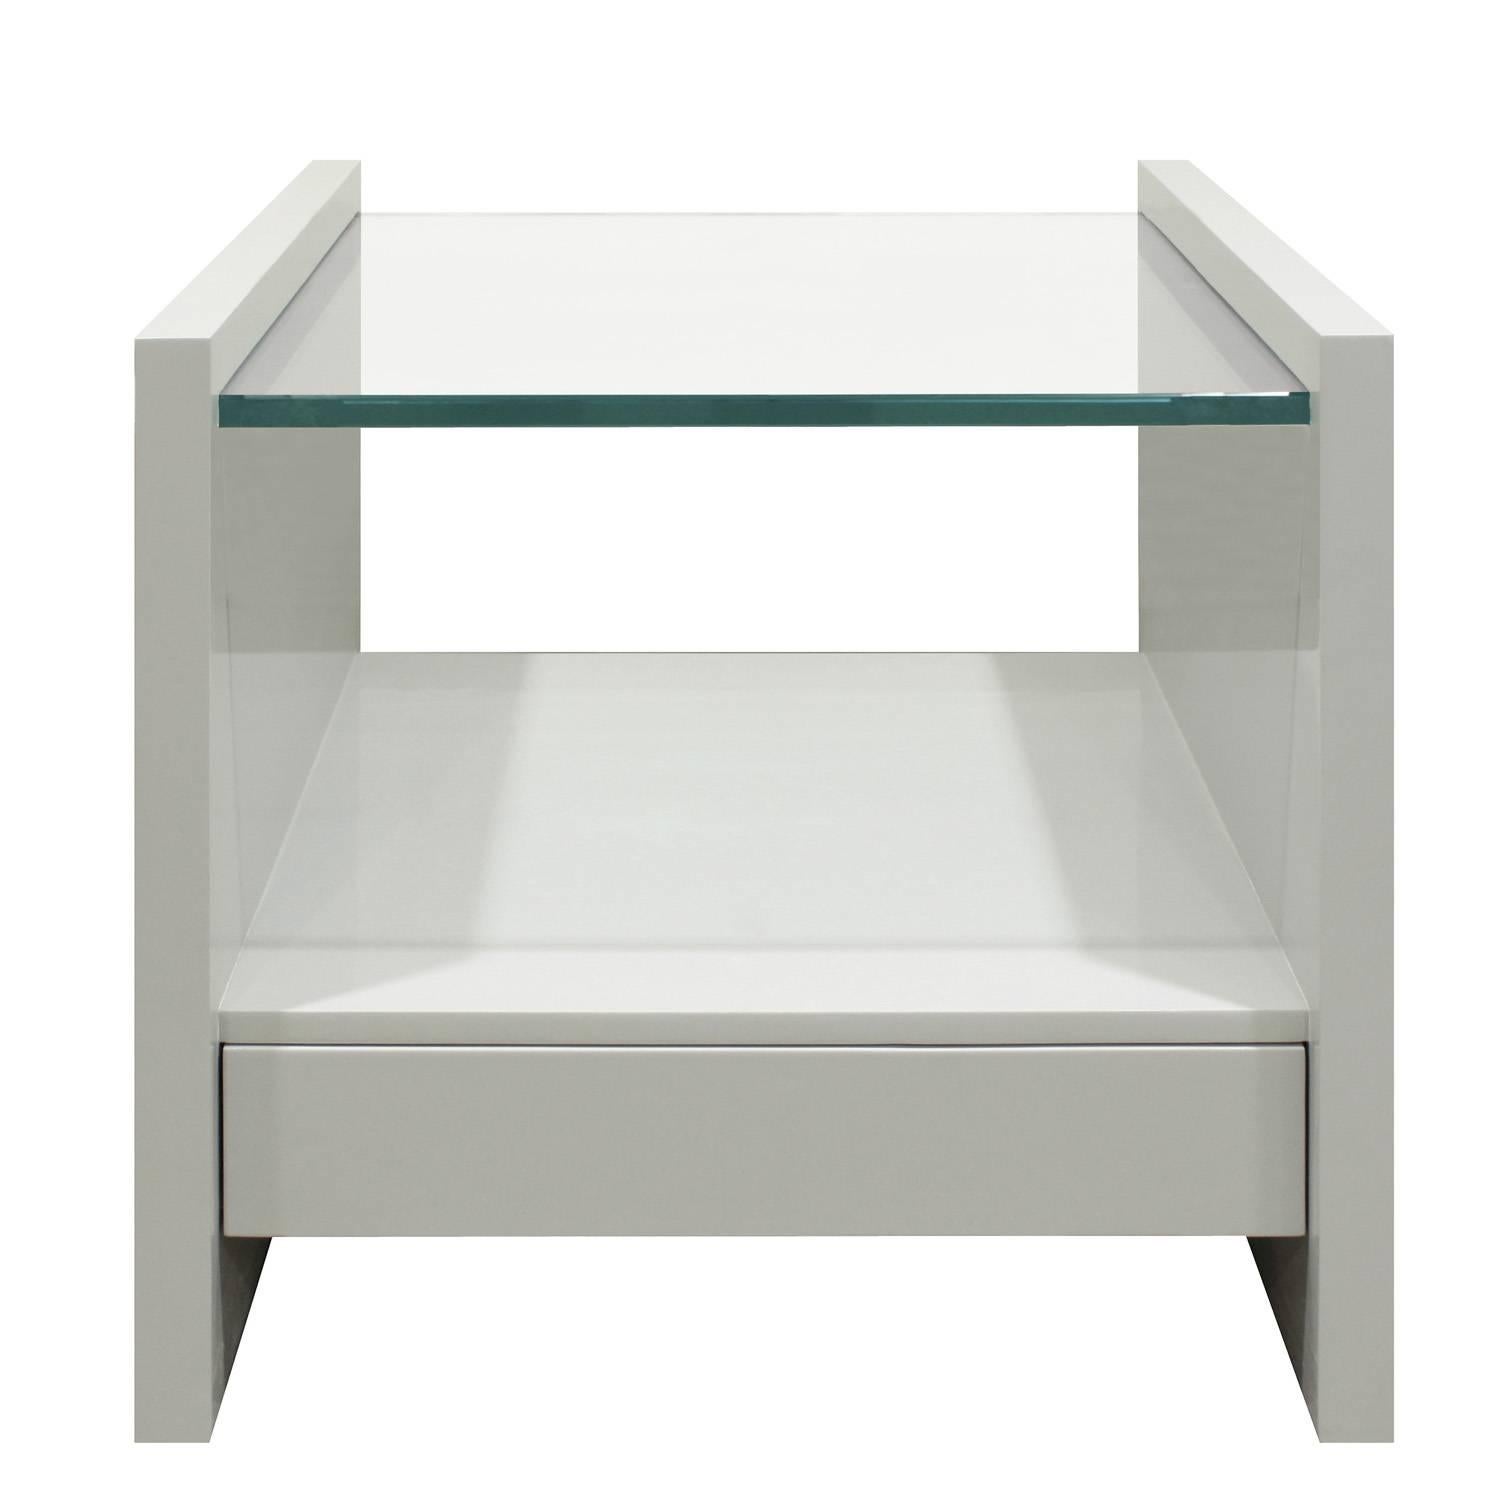 Pair of clean line bedside tables in gray lacquer with drawer and glass shelf by Karl Springer, American 1970s. Newly lacquered by Lobel Modern.